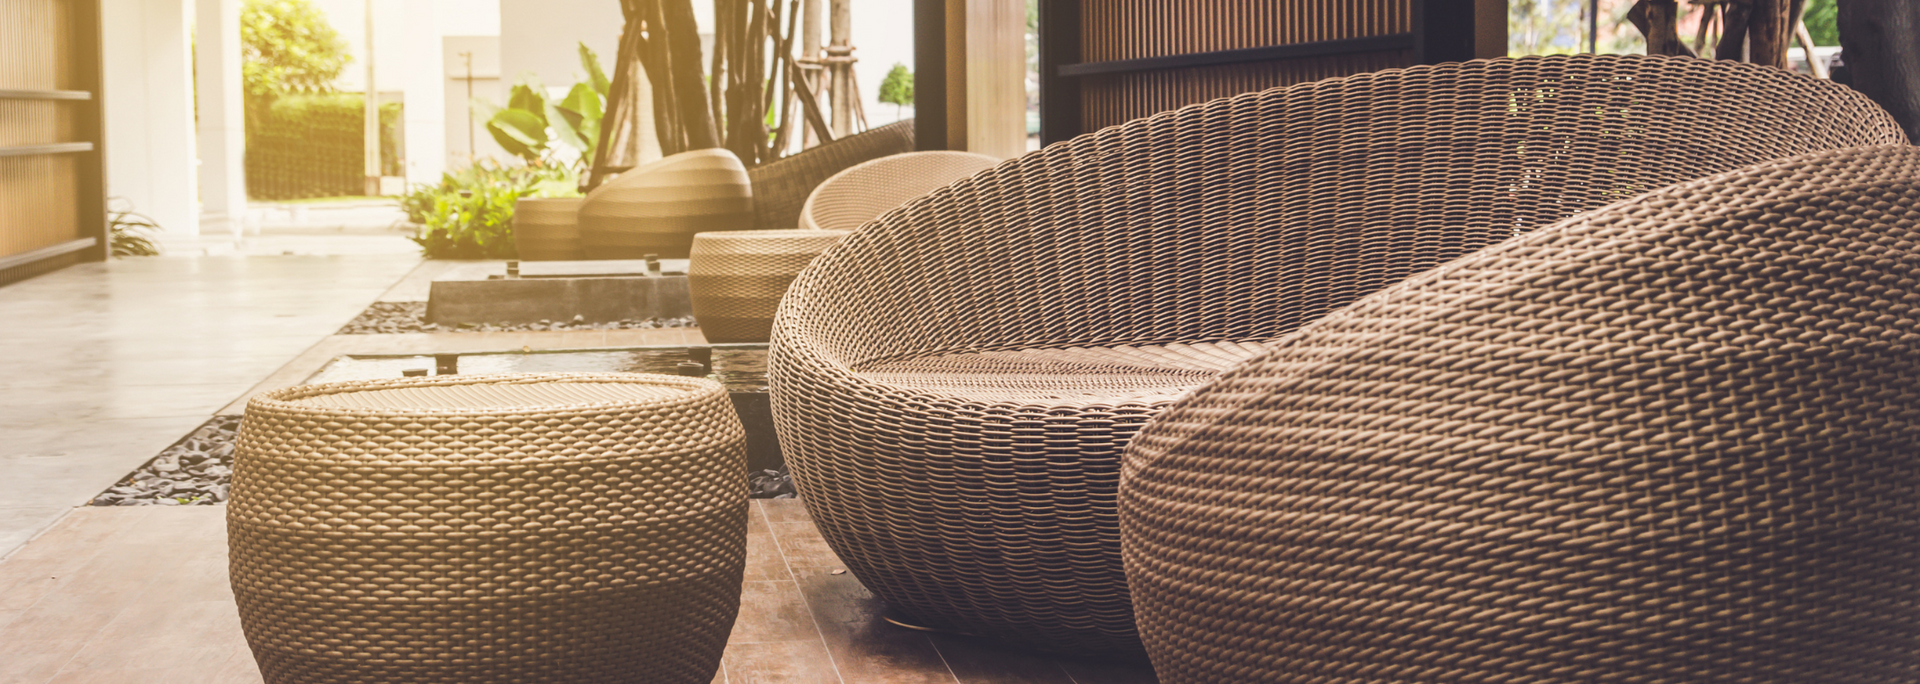 Picture of some rattan furniture